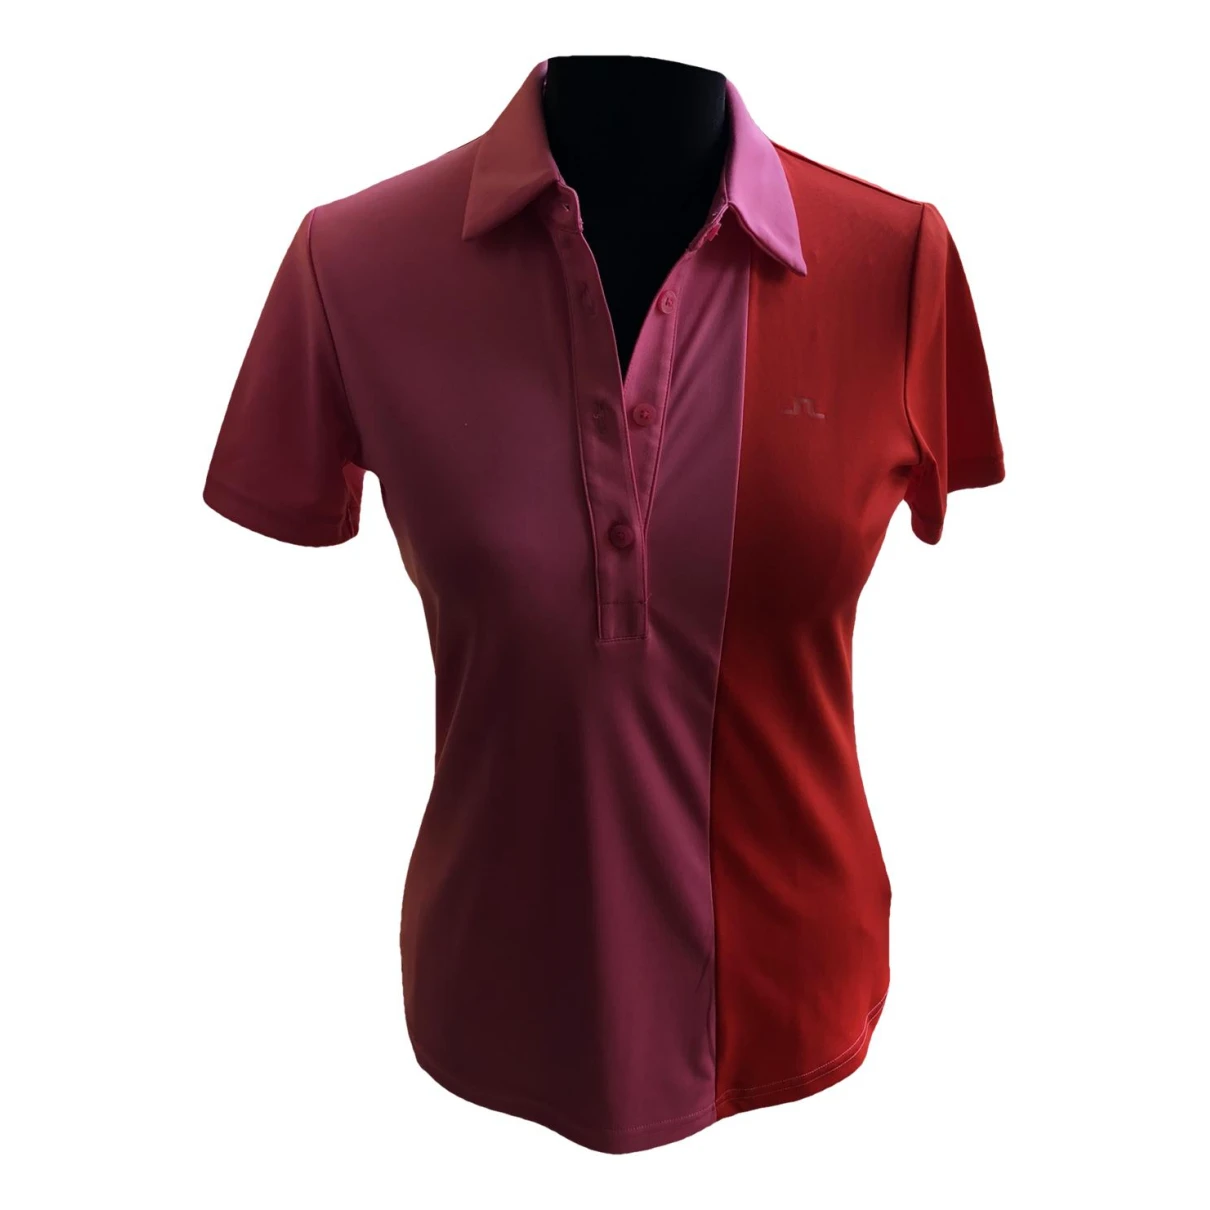 Pre-owned J. Lindeberg Polo In Pink